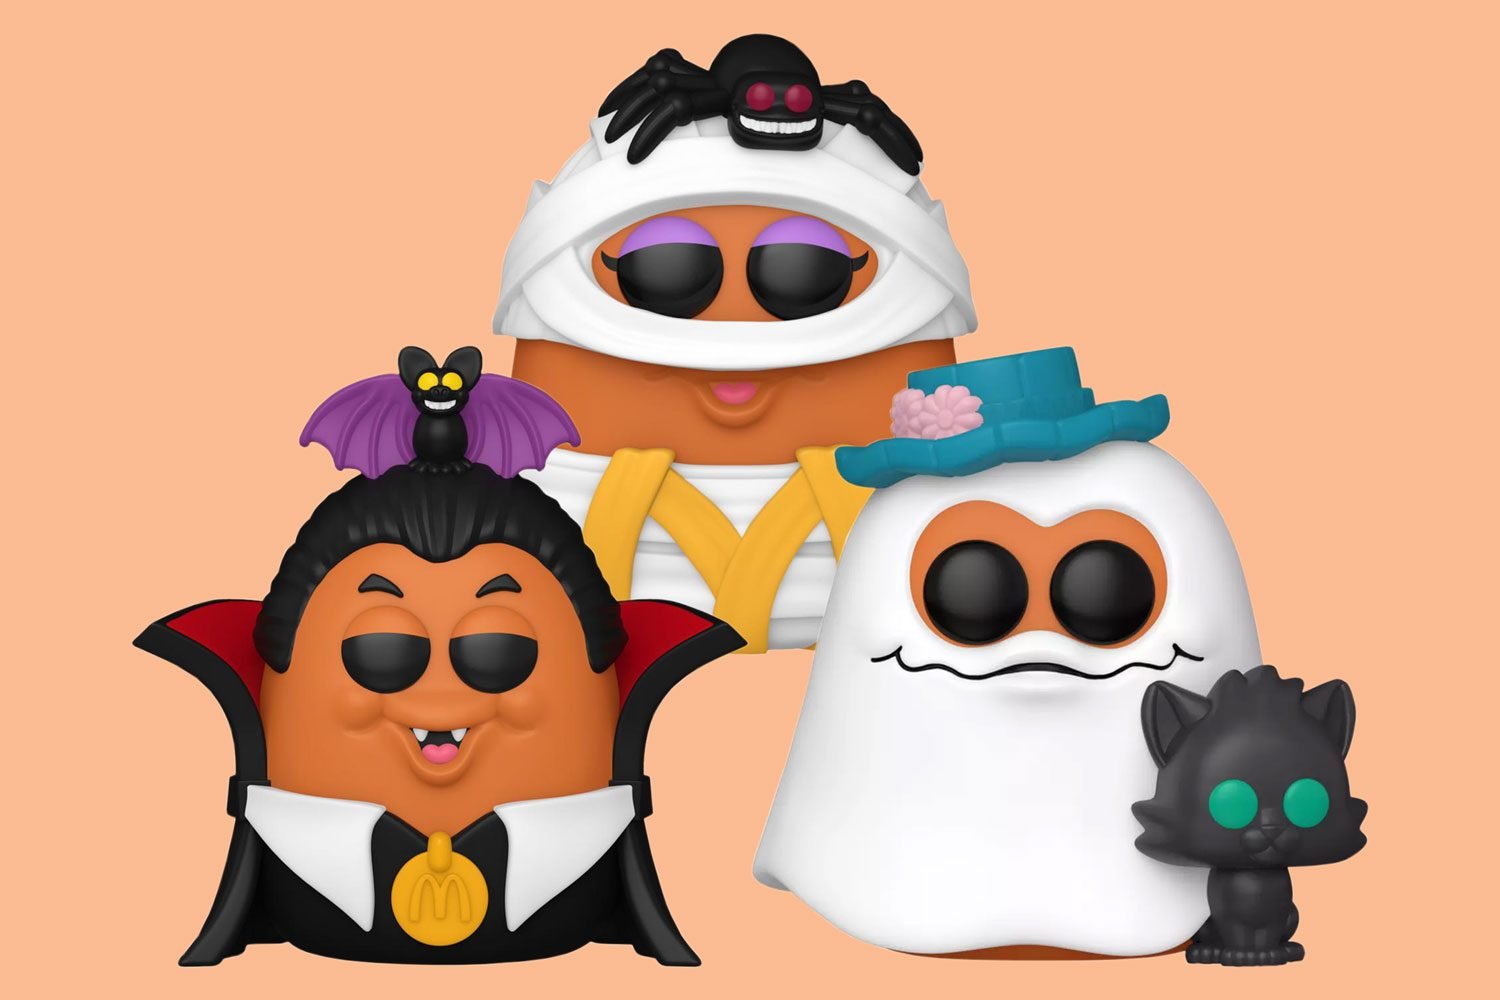 McDonald’s Halloween McNugget Buddies Are Coming Back This Year as Funko Pop Toys thumbnail